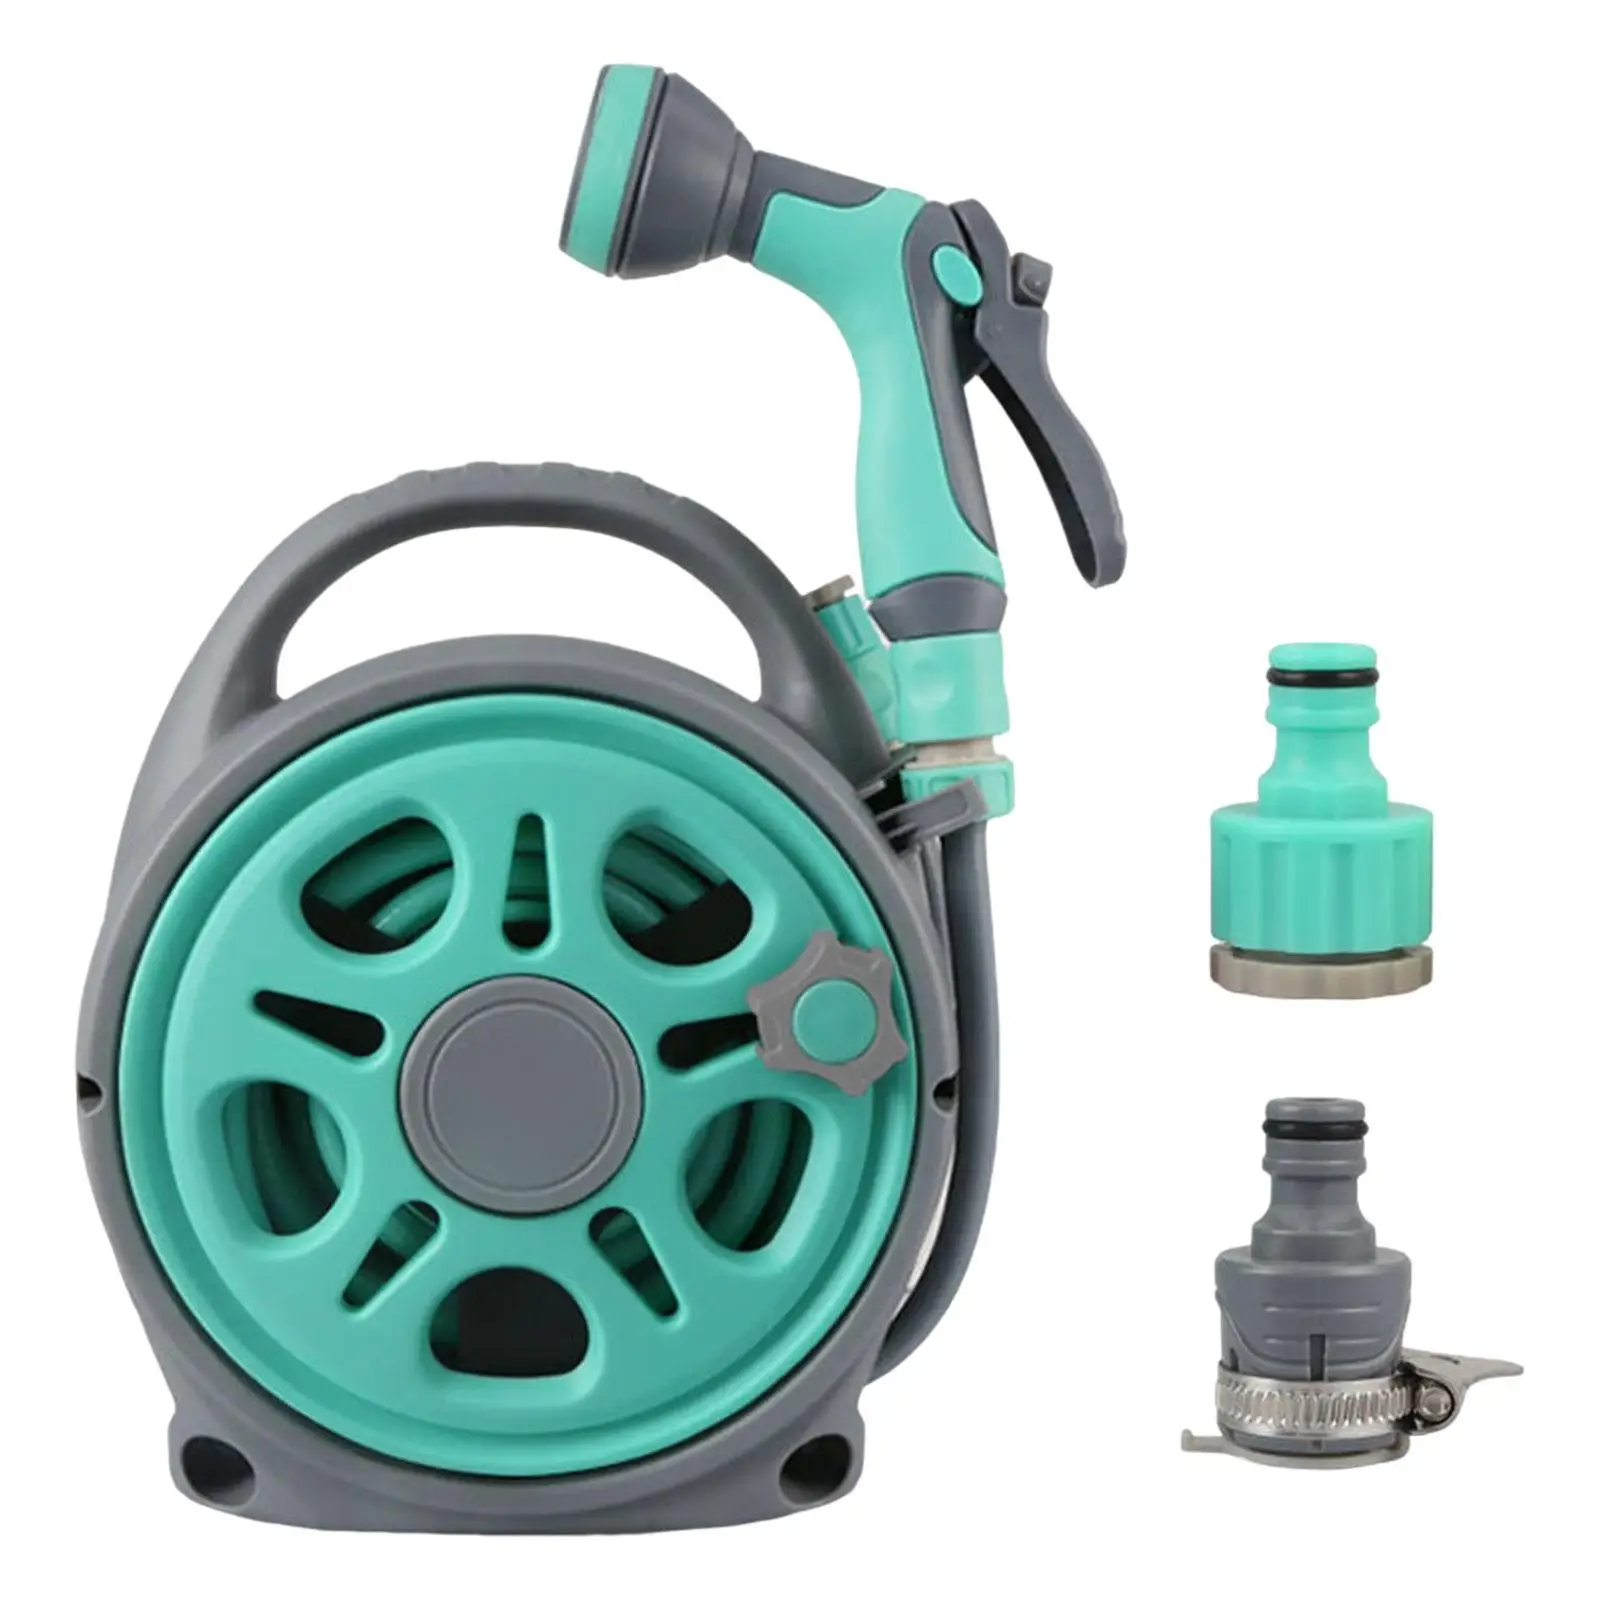 Portable Garden Hose Reel 7 Function Nozzle 16M Rolling Hose Reel for Car Washing Watering Flowers Showering Pets Cleaning